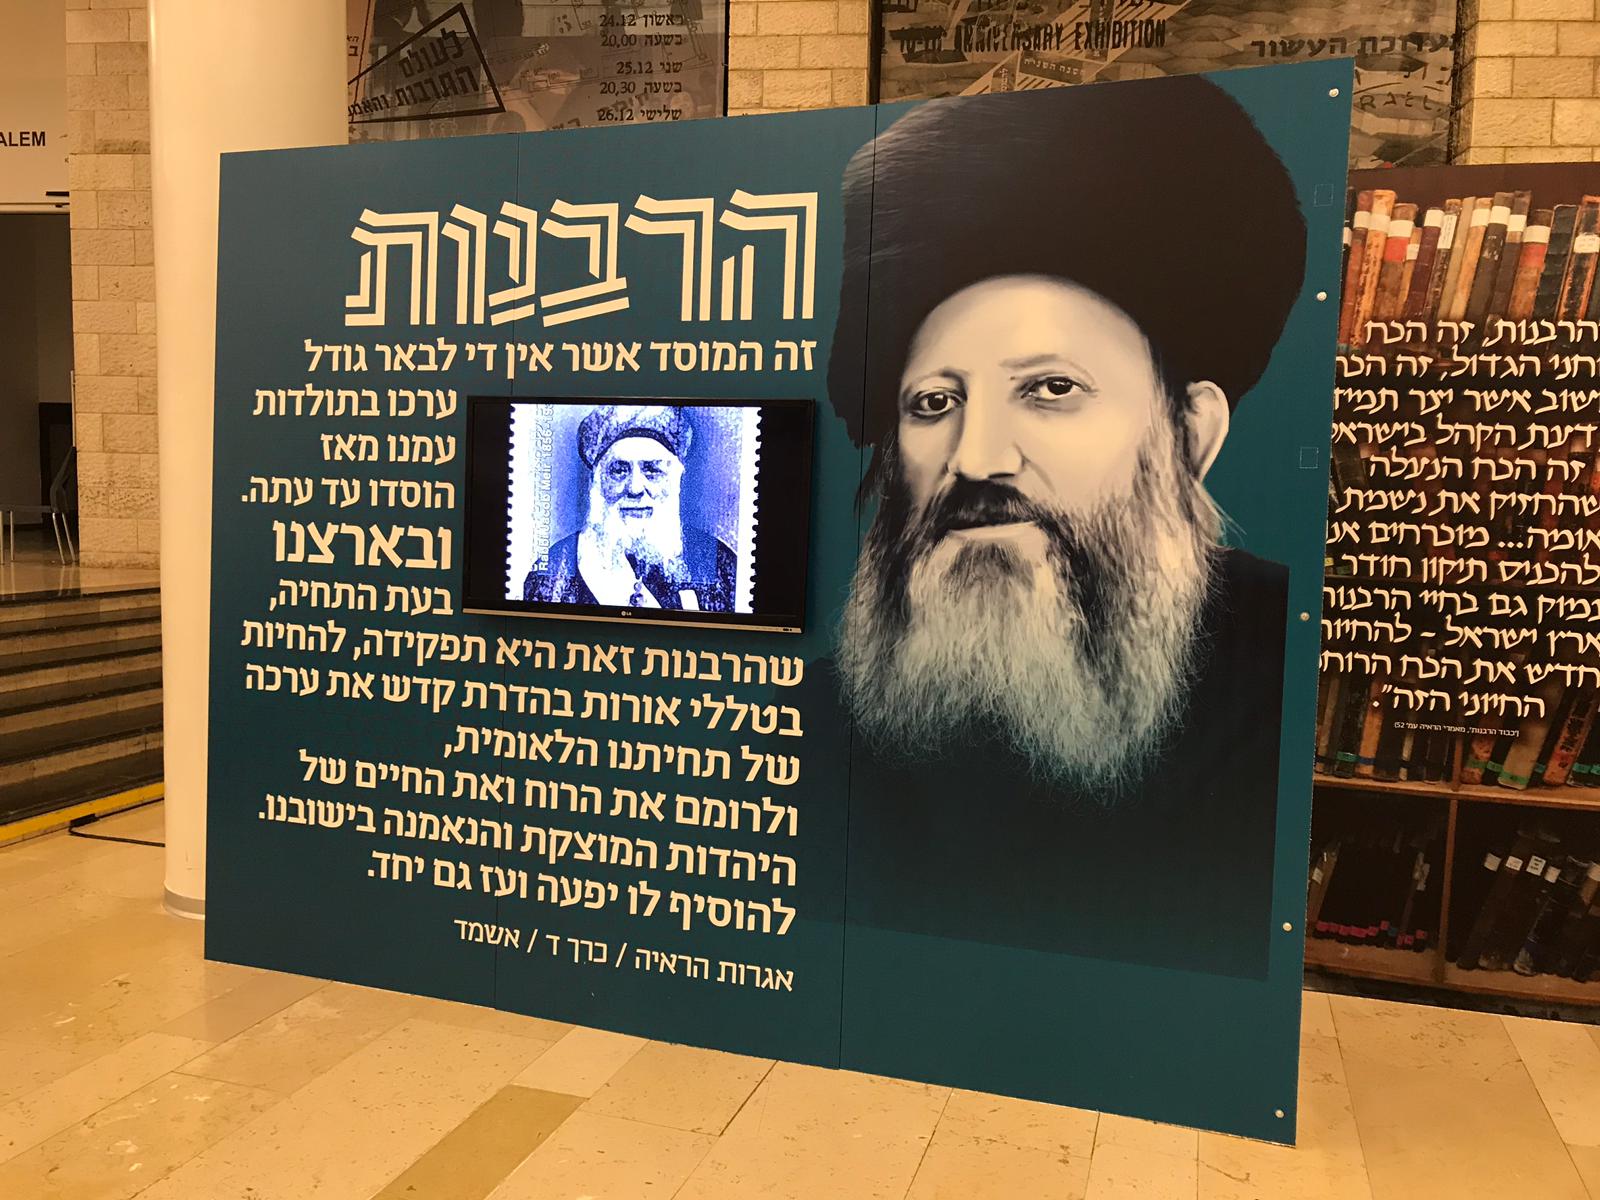 100 years for the rabbinate